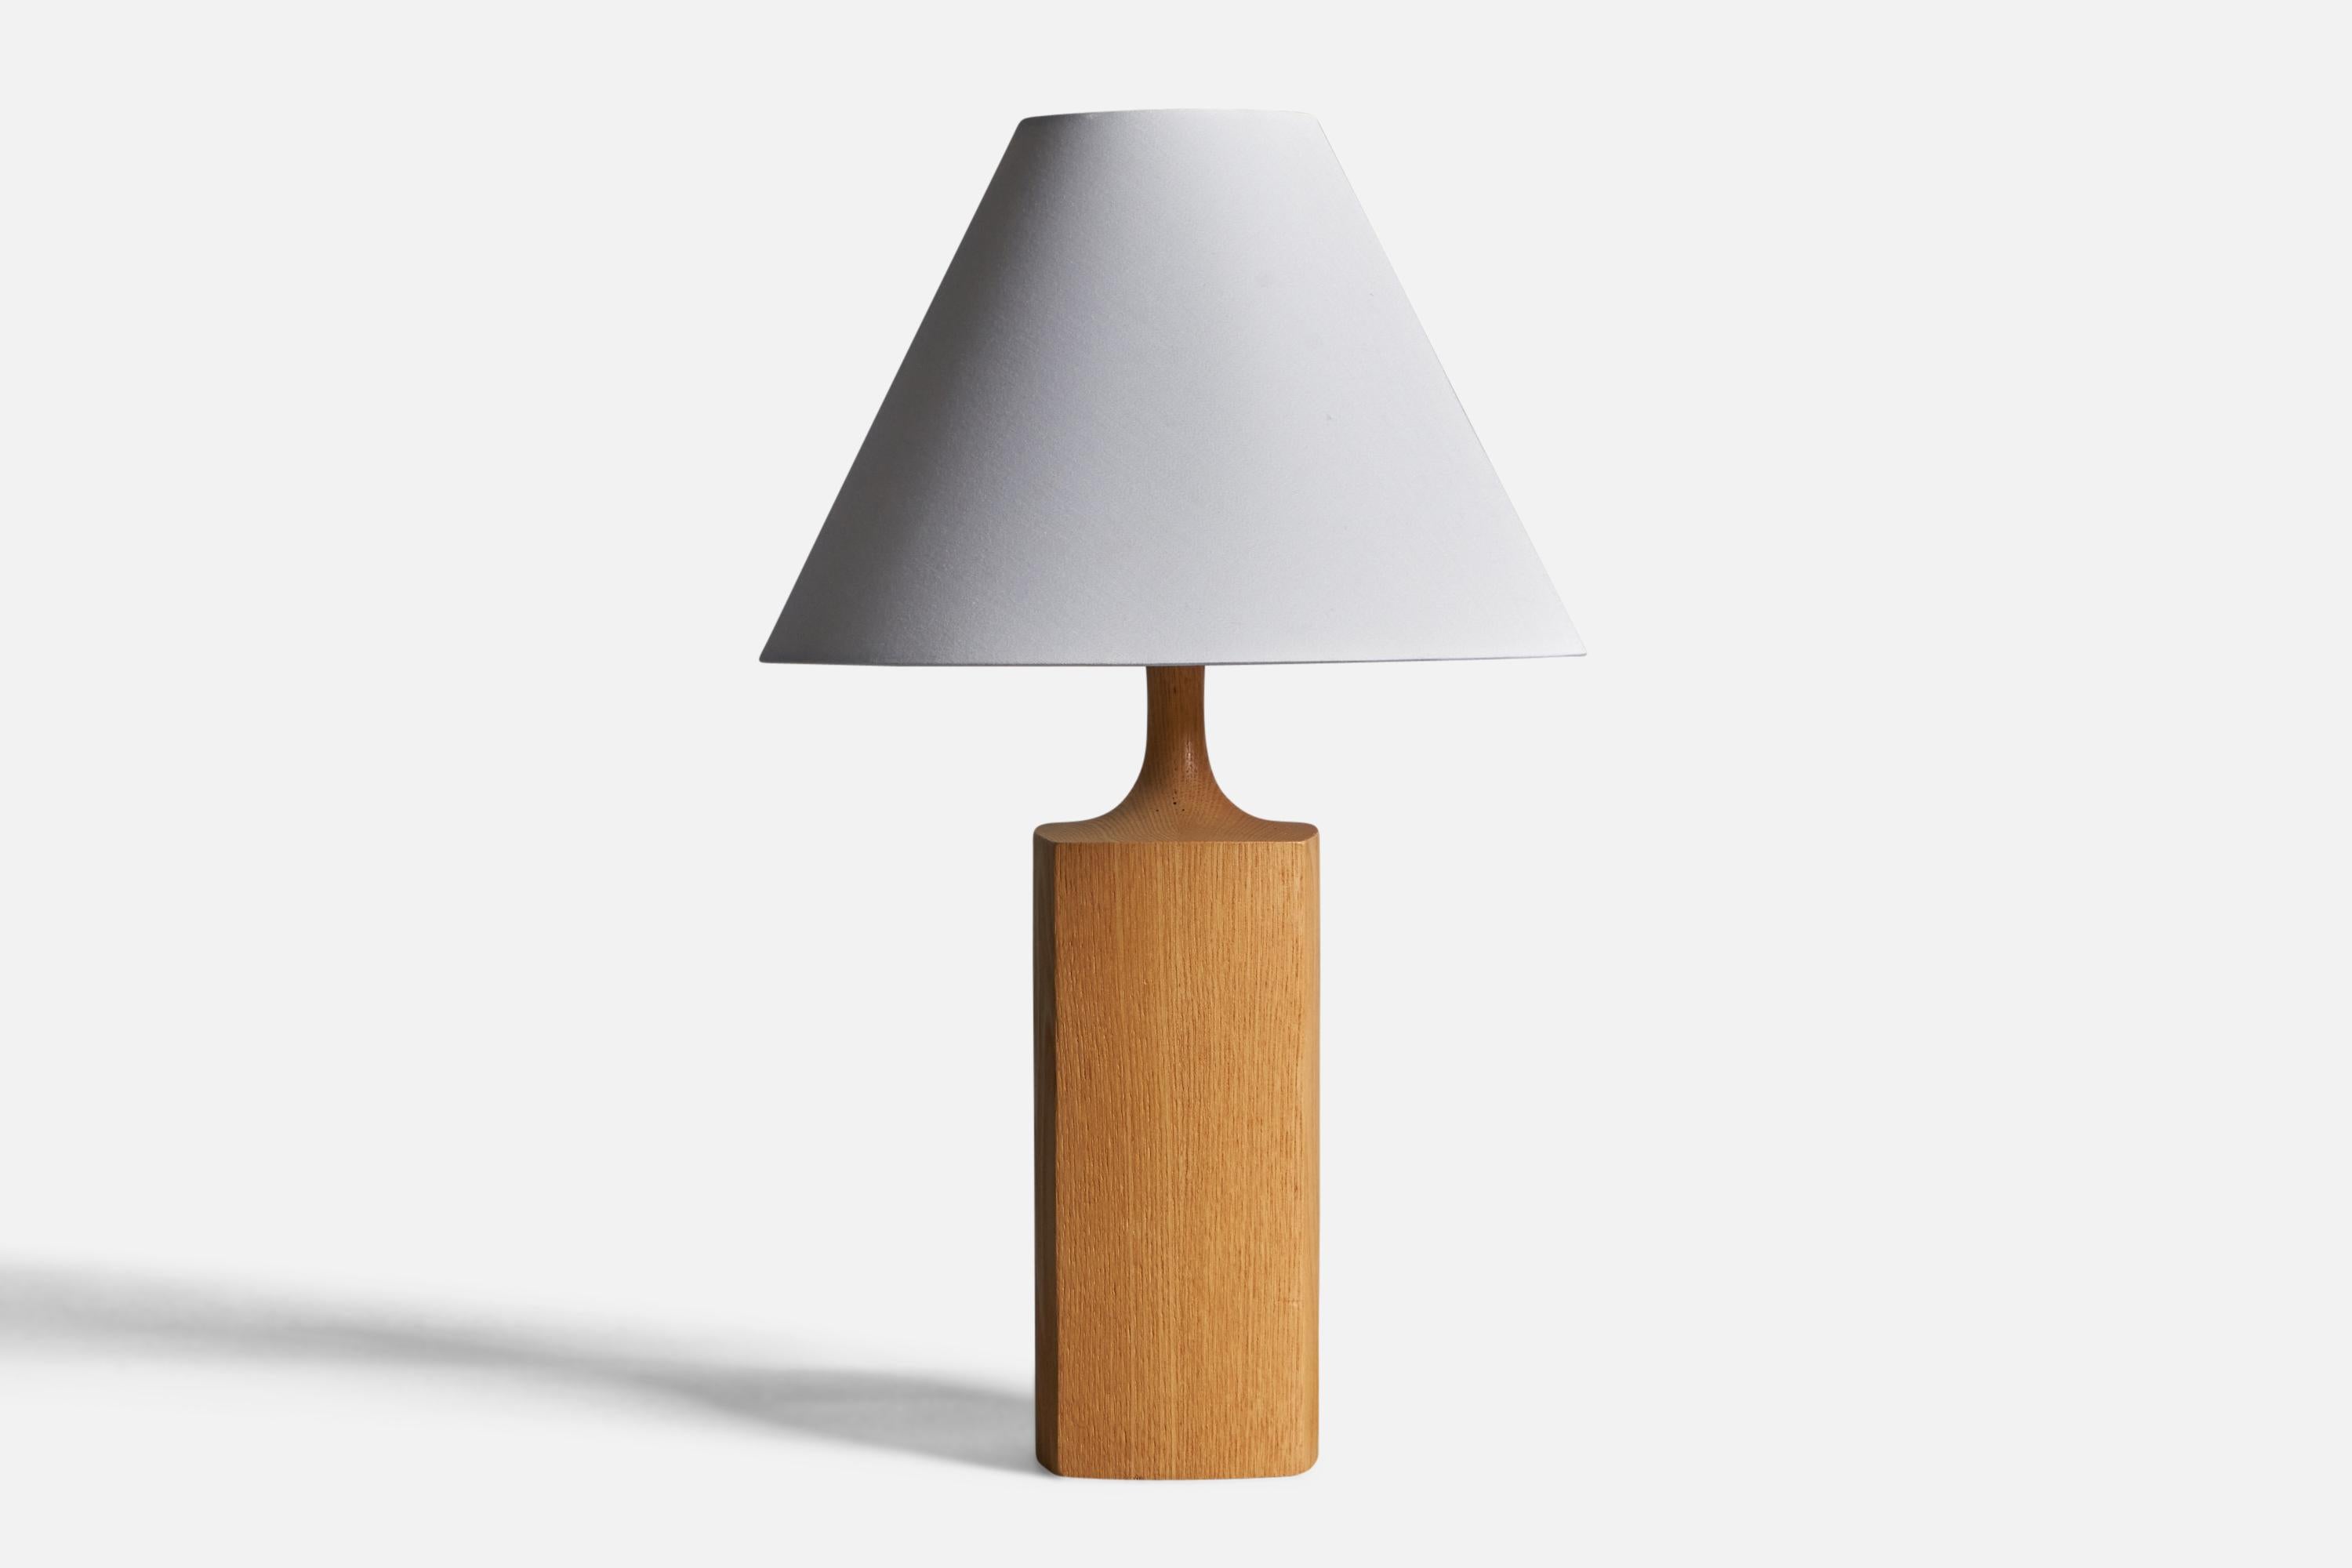 An oak table lamp designed and produced by Kjell Blomberg, Sweden, 1970s.

Dimensions of Lamp (inches): 13.3